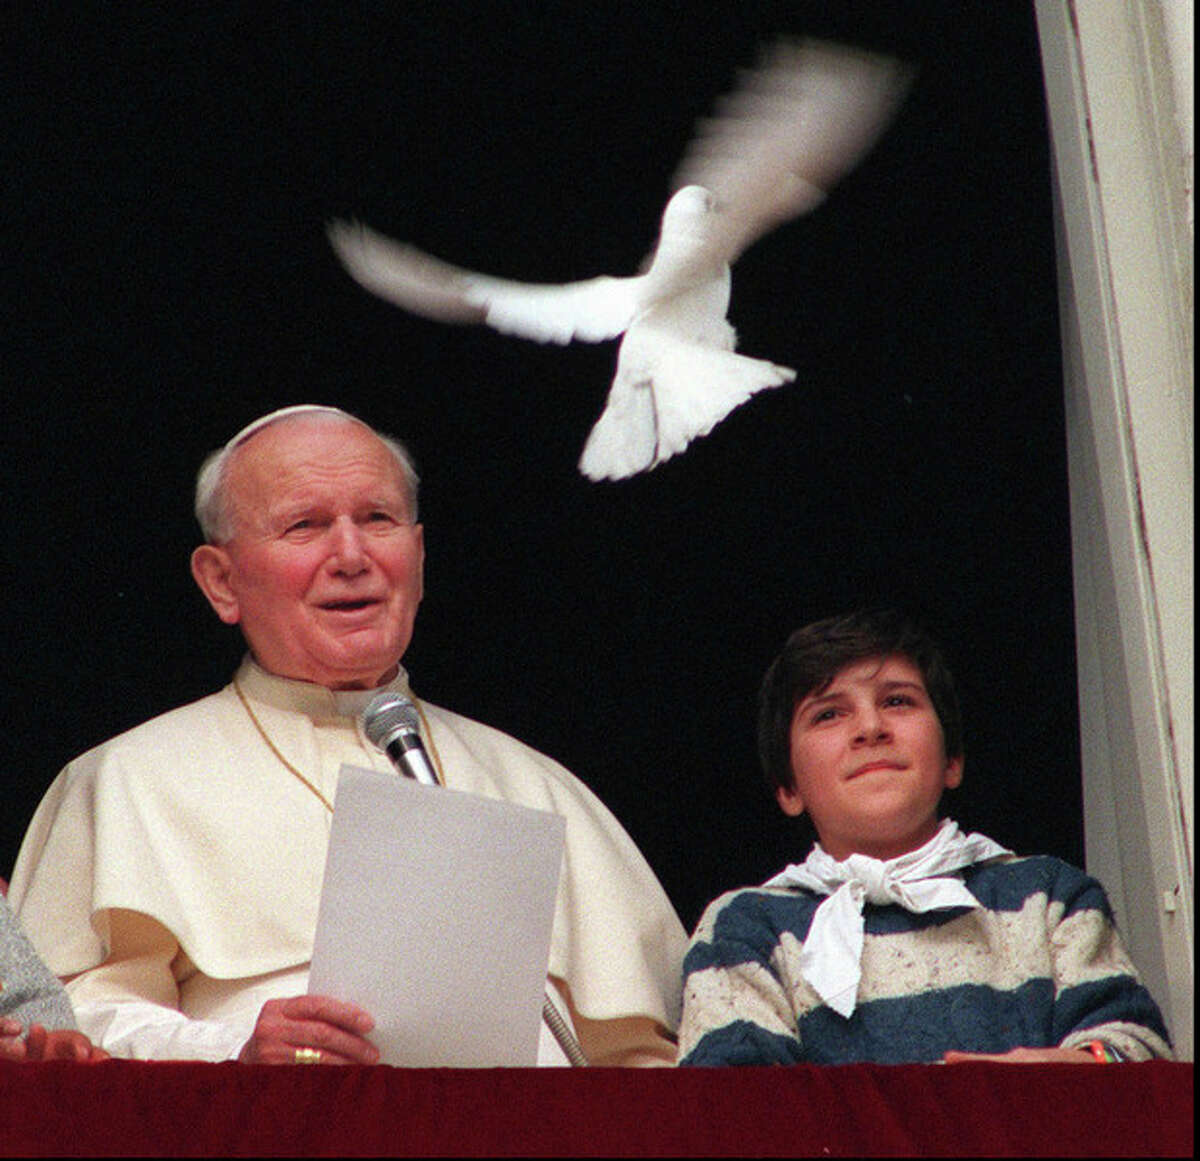 FILE - In this Jan. 28 1996 file photo, Pope John Paul II looks at a dove after he delivered the noon blessing from the window of his studio overlooking St. Peter's square at the Vatican. Pope Francis has cleared John Paul II for sainthood, approving a miracle attributed to his intercession. Francis also decided Friday, July 5, 2013, to canonize another beloved pope, John XXIII, even though there has been no second miracle attributed to his intercession. The Vatican said Francis approved a decision by cardinals and bishops. The ceremonies are expected before the end of the year. (AP Photo/Bruno Mosconi, File)